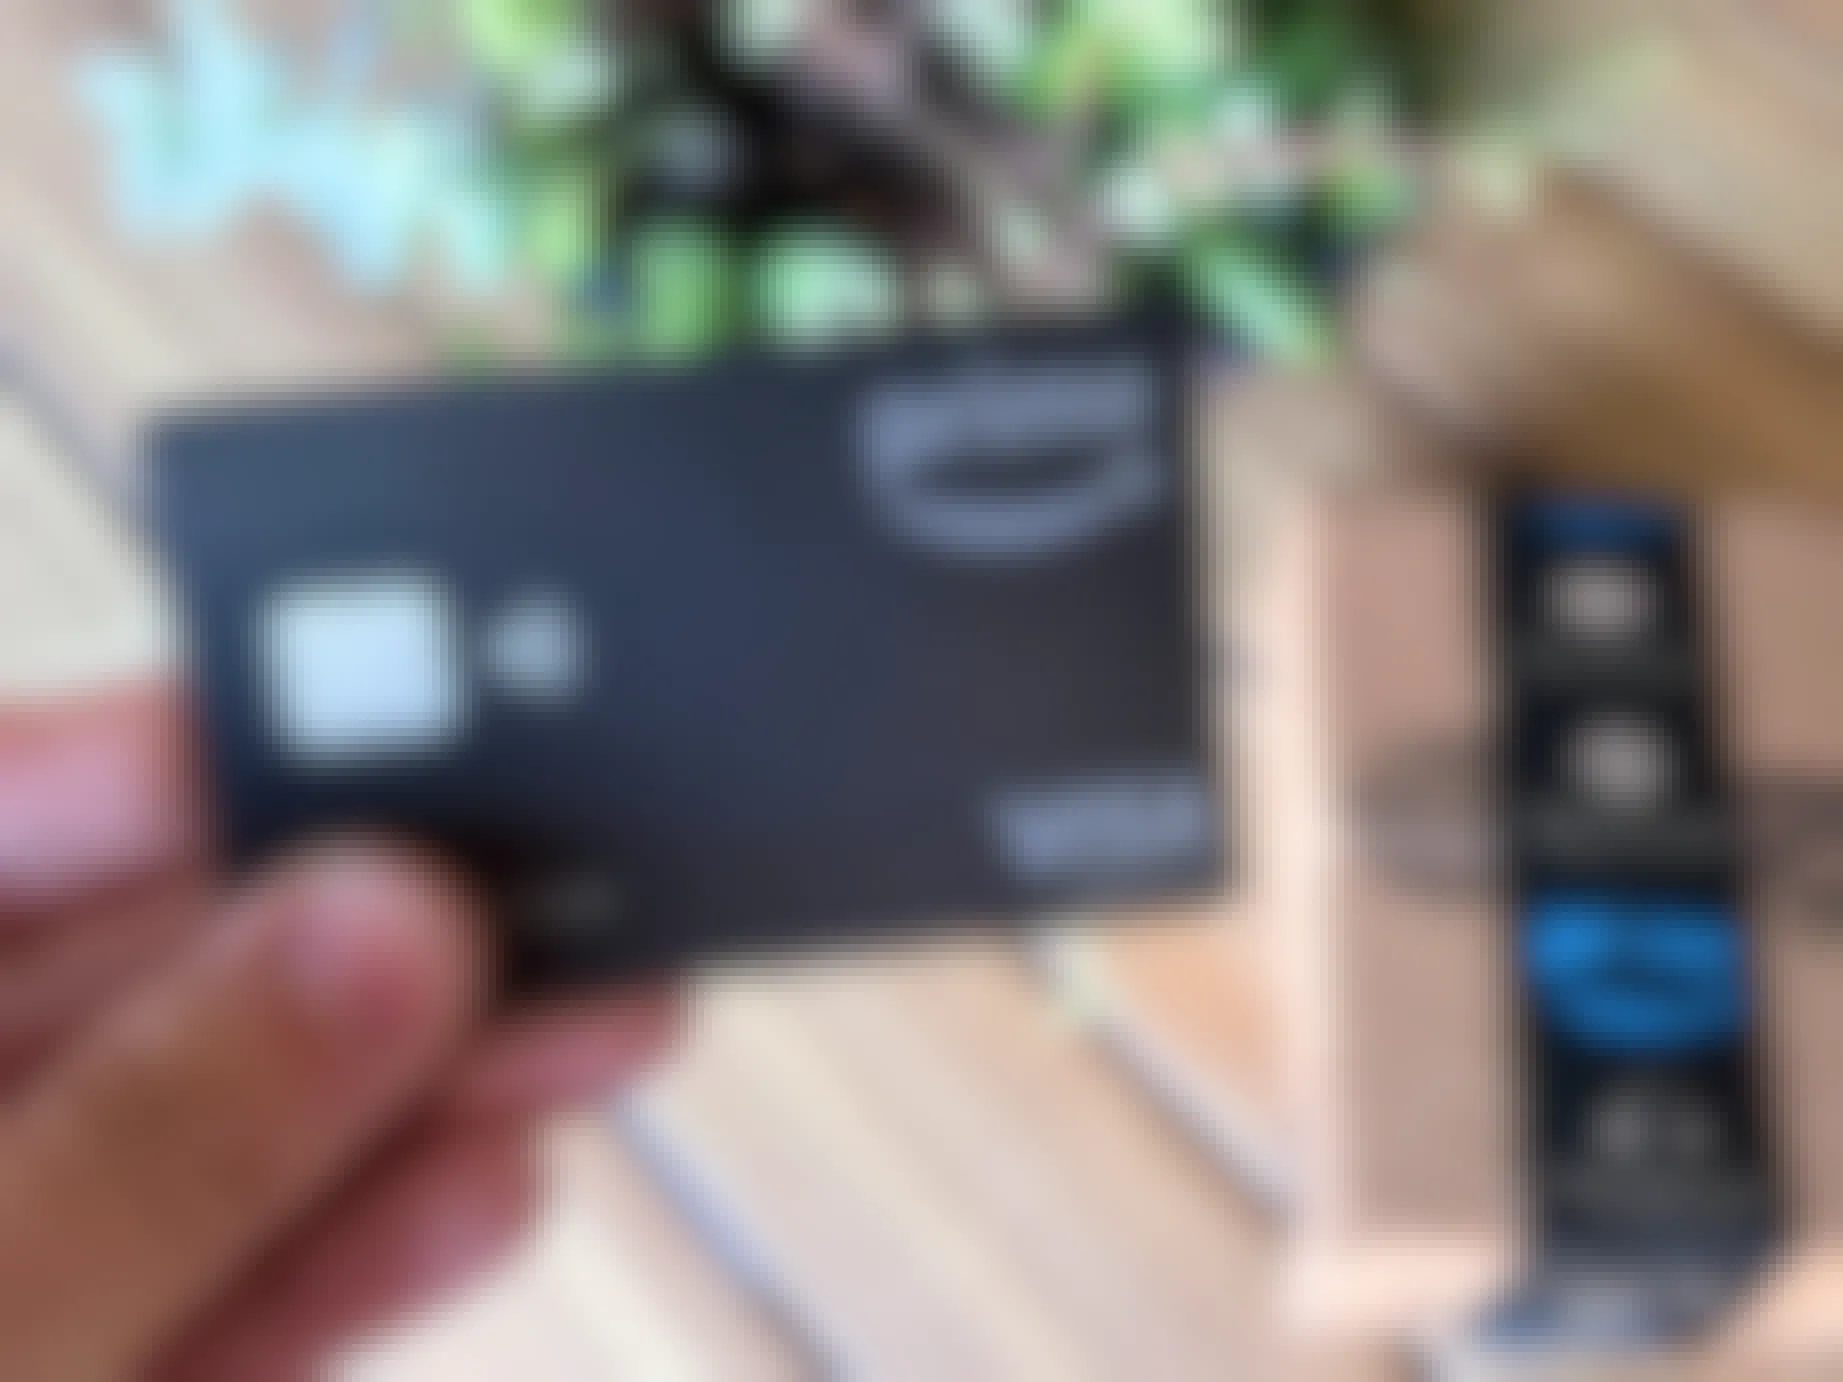 Someone holding an Amazon Prime credit card next to an Amazon box